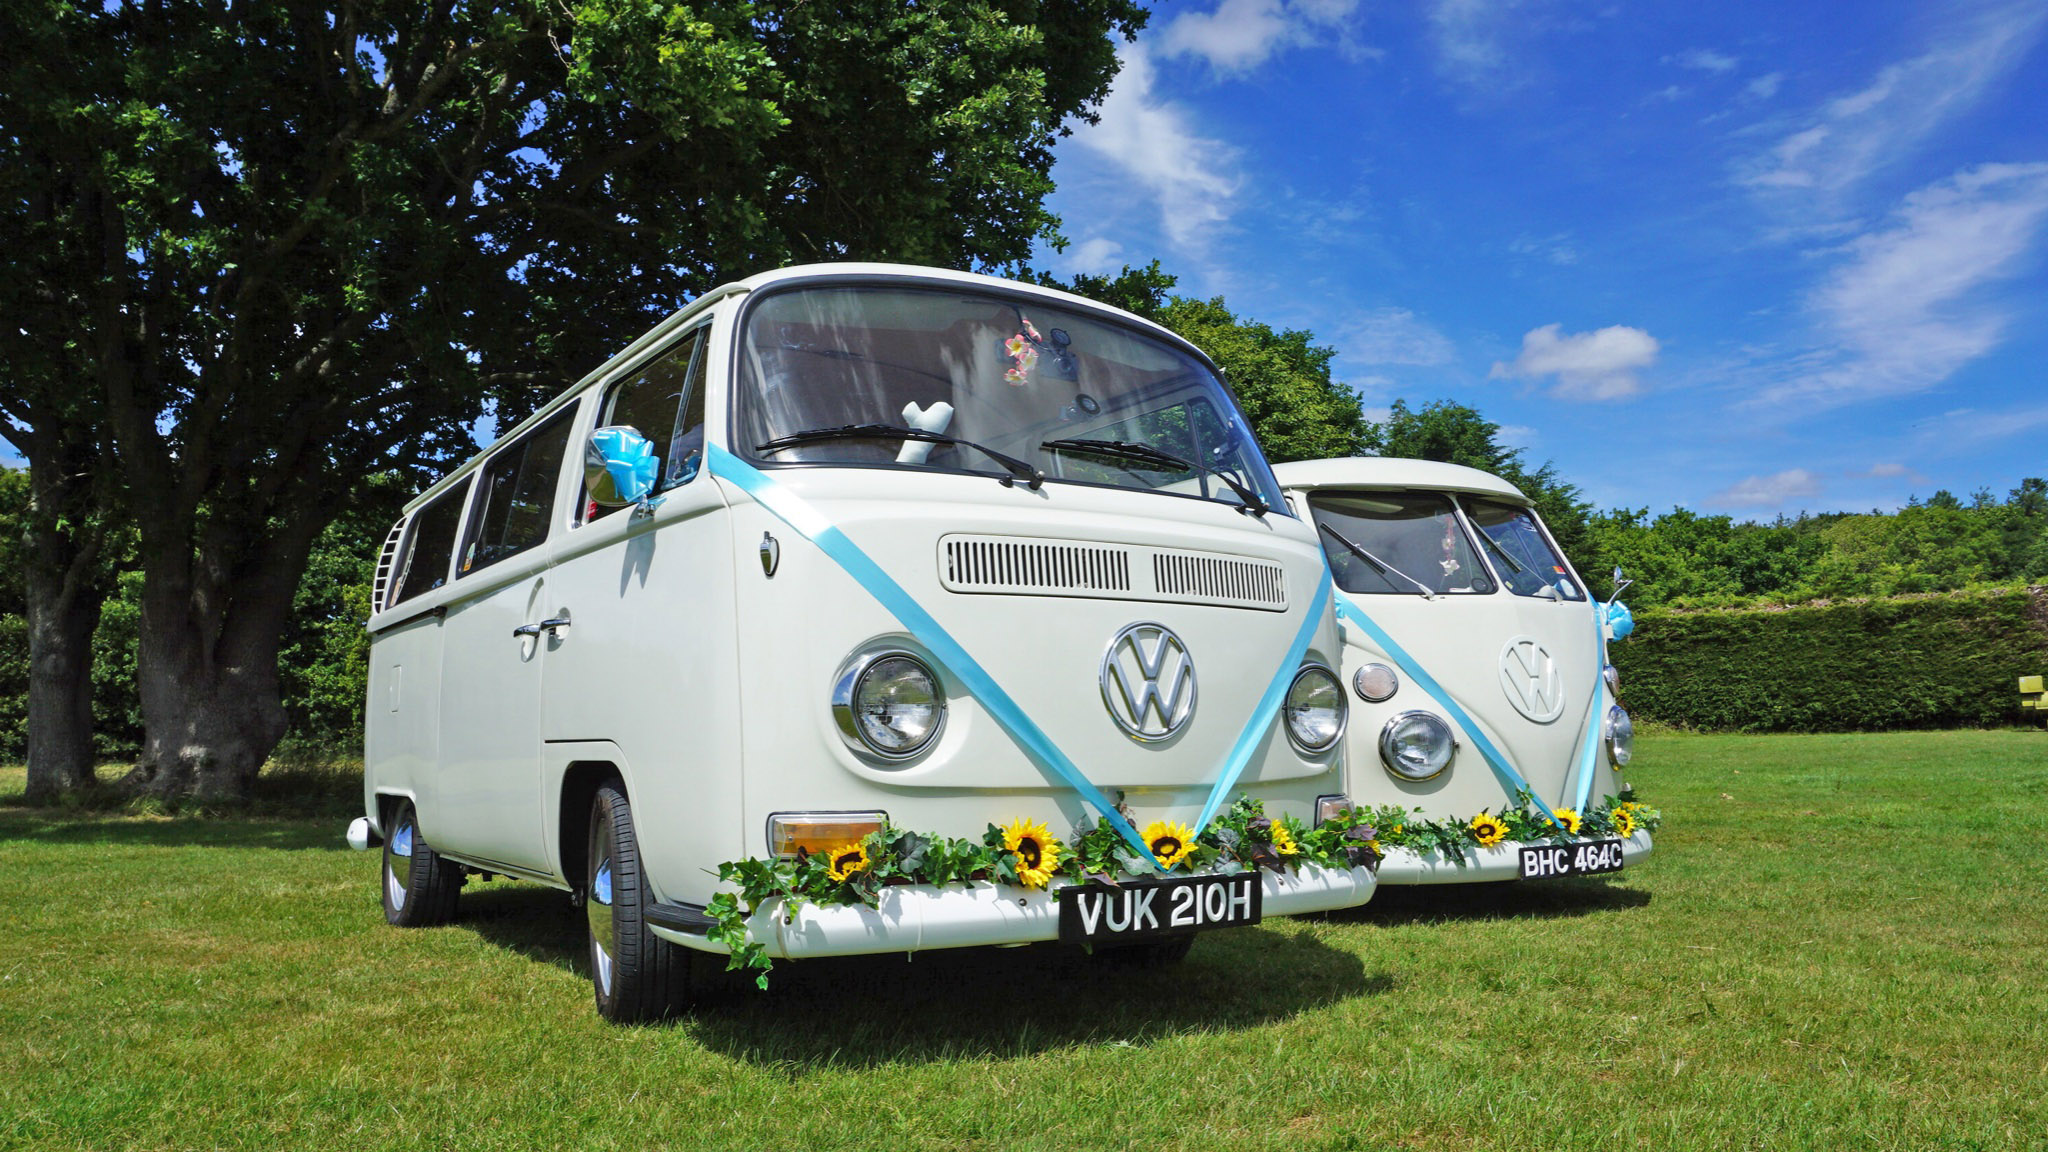 Two Classic VW Campervans decorated with turquoise blue Ribbons at a local Woking park with green trees in the background